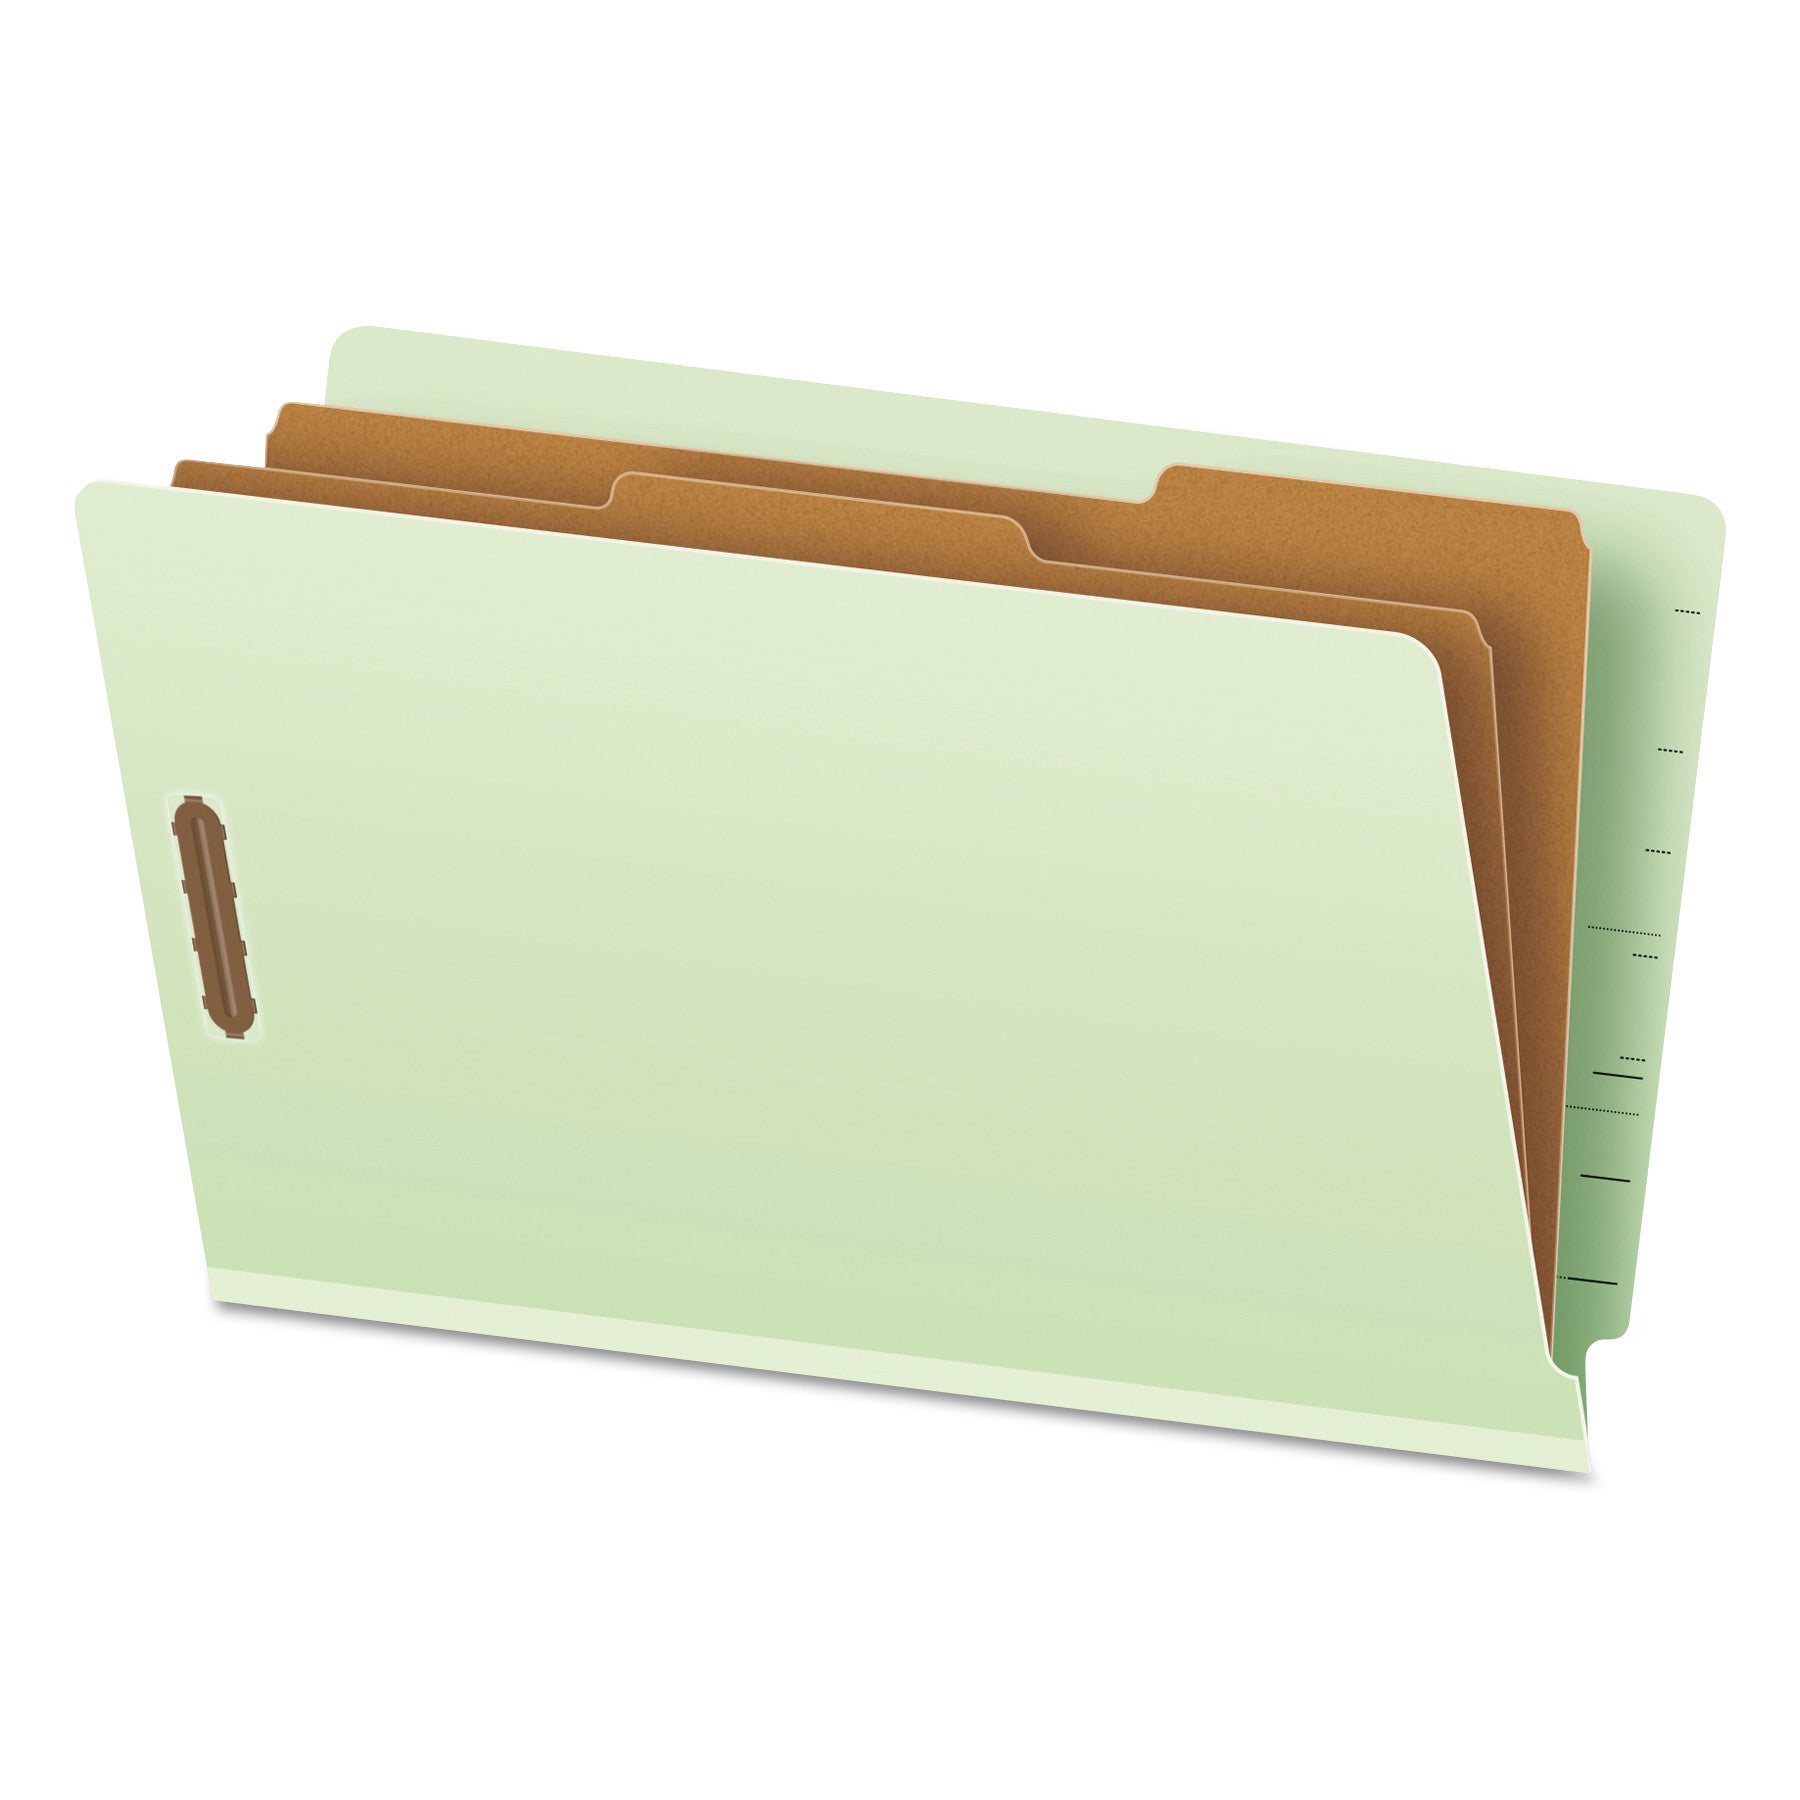 End Tab Classification Folders, 2" Expansion, 2 Dividers, 6 Fasteners, Legal Size, Pale Green Exterior, 10/Box - 